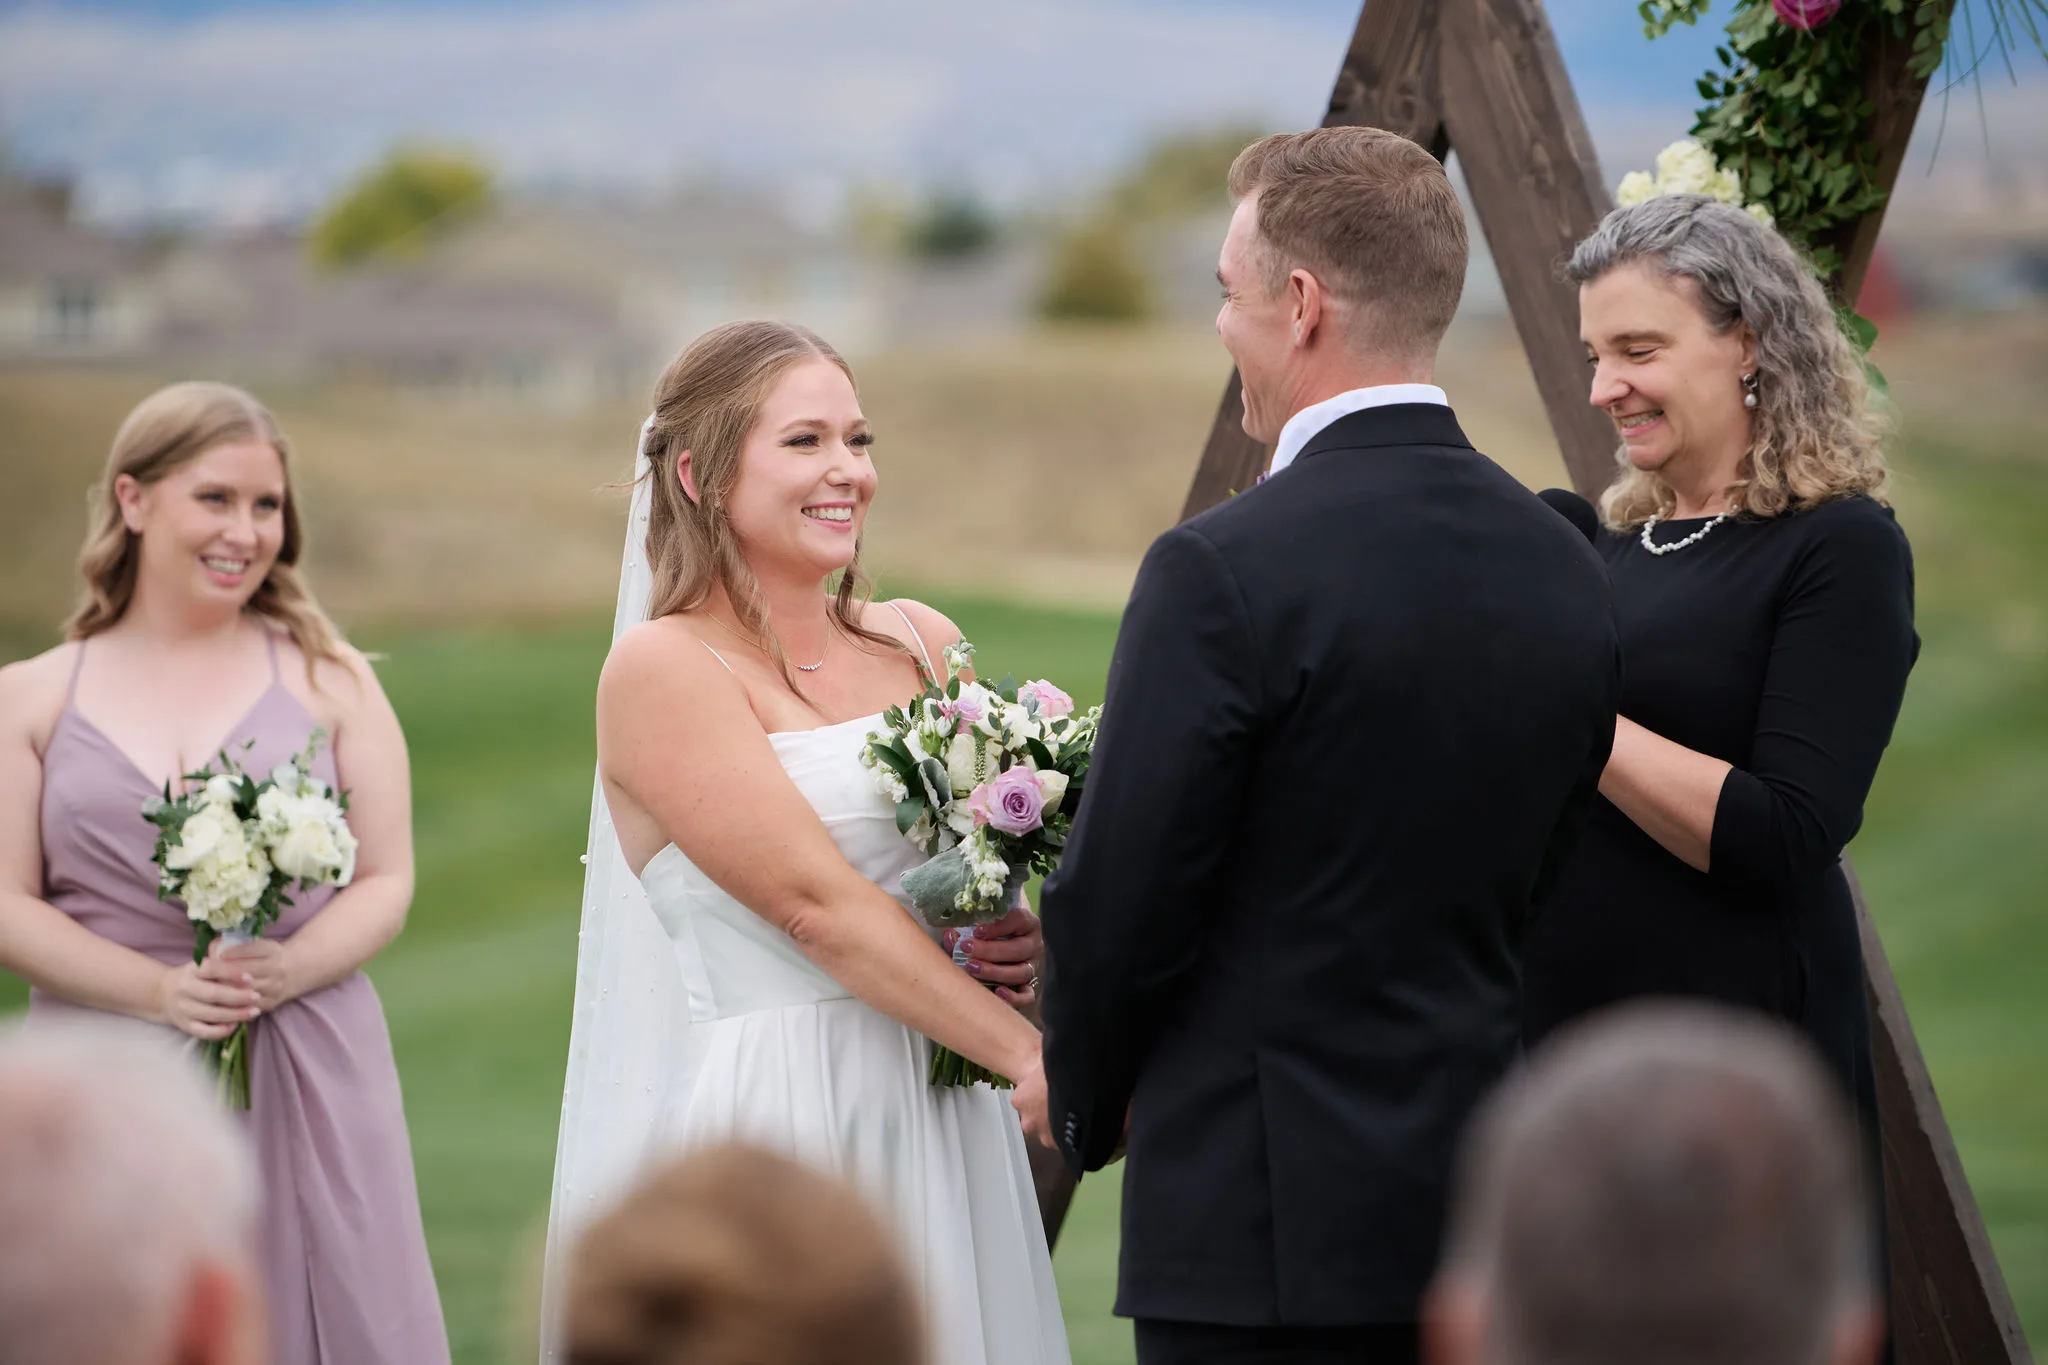 Missoula wedding ceremony with Officiant Courtney of Young Hip & Married